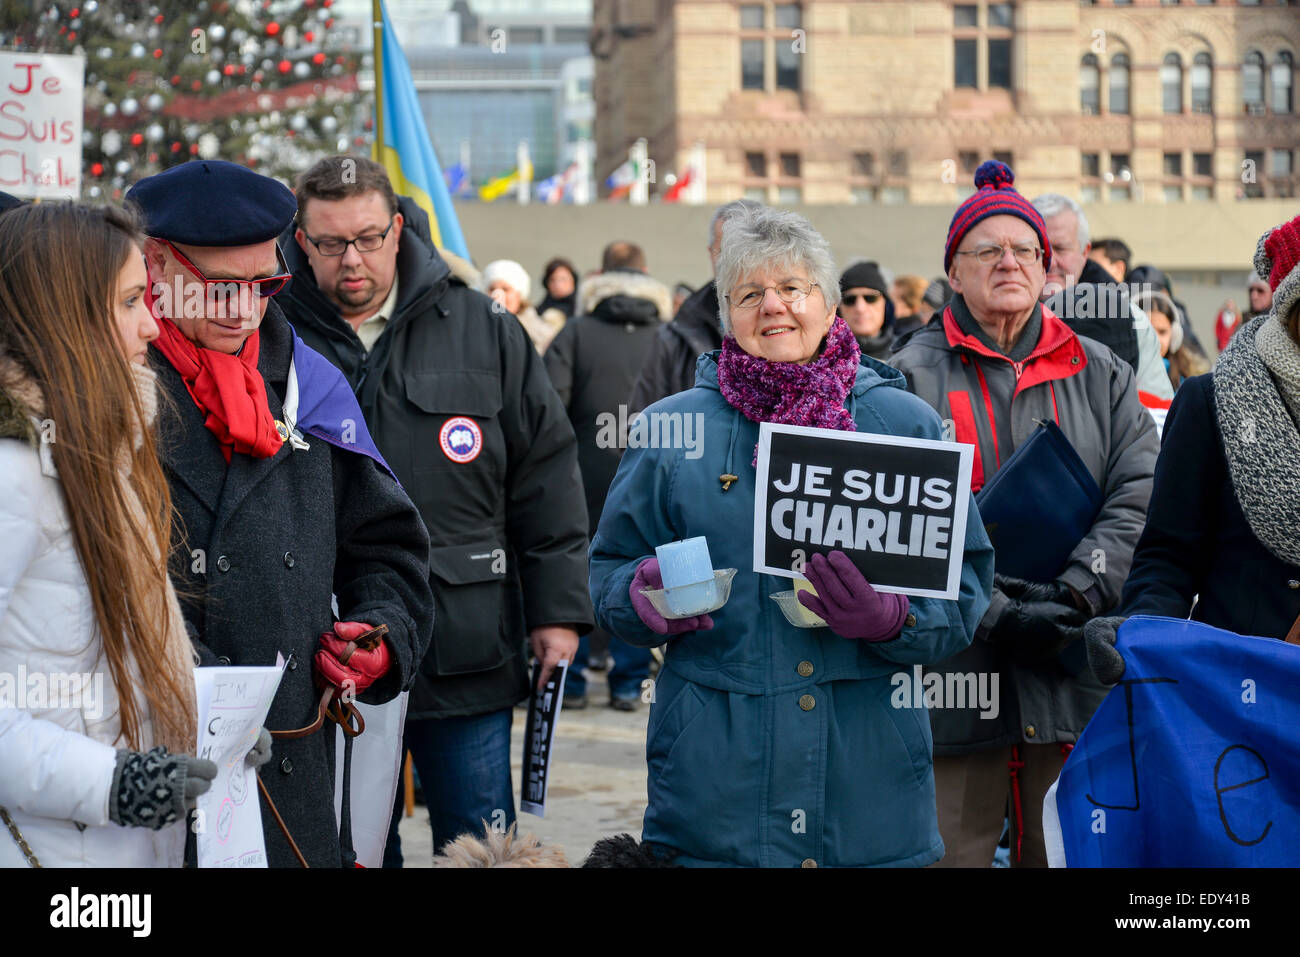 Toronto, Ontario, Canada. 11th January, 2015. Hundreds of Torontonians converged on Nathan Philips Square on Sunday afternoon to add their voices to a network of simultaneous demonstrations going on in major cities across Canada and around the globe to remember the victims of last week’s extremist violence in Paris. Credit:  Nisarg Lakhmani/Alamy Live News Stock Photo